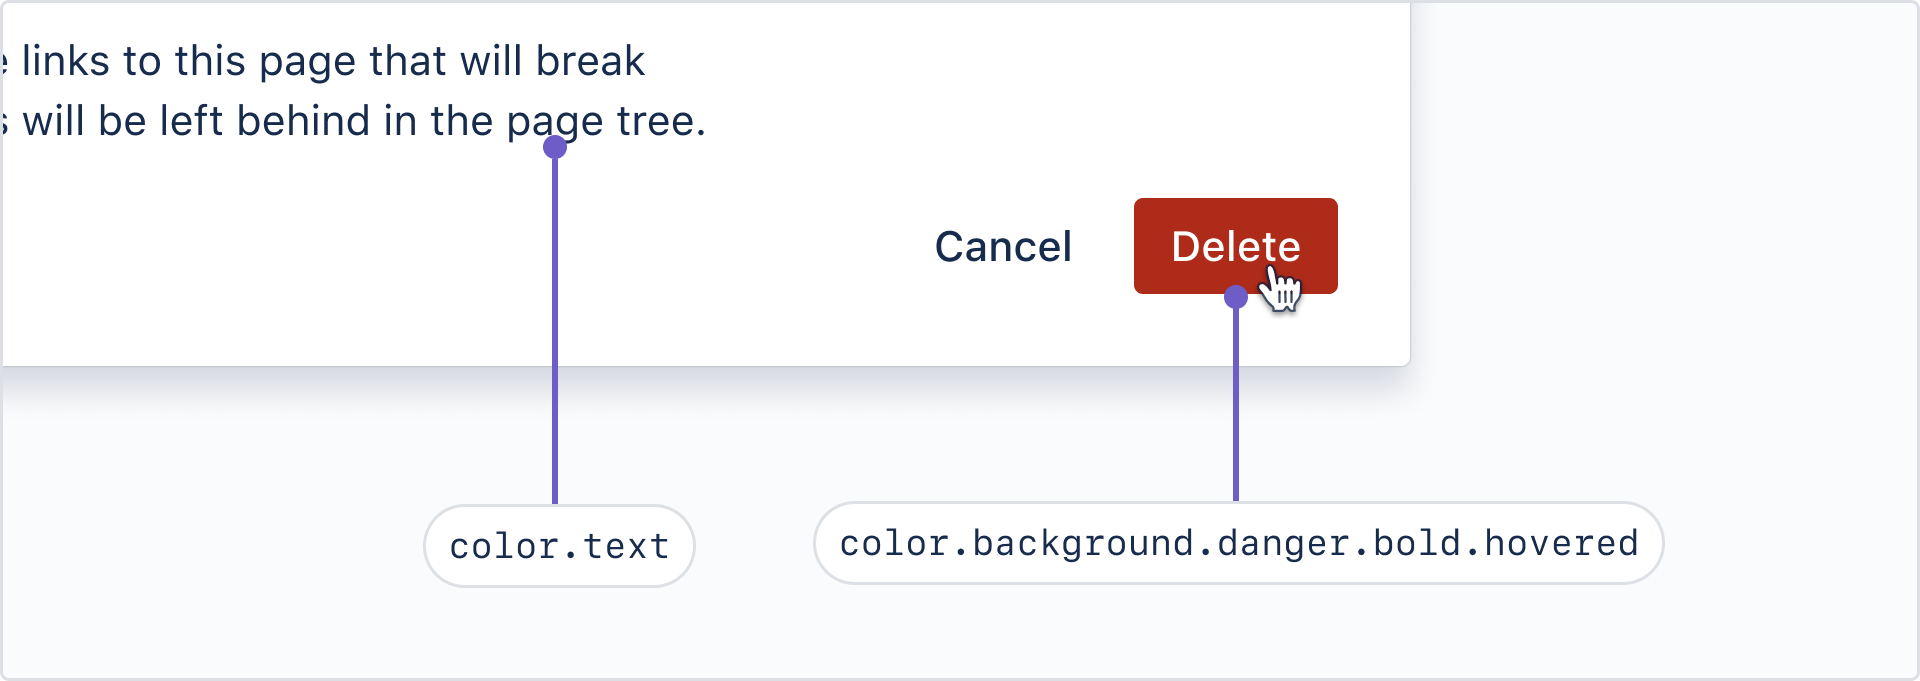 A modal dialog with a delete button. The text in the modal uses the color token "color.text" and the background color of the button uses, "color.background.danger.bold.hovered," which is a mid-to-dark red color.